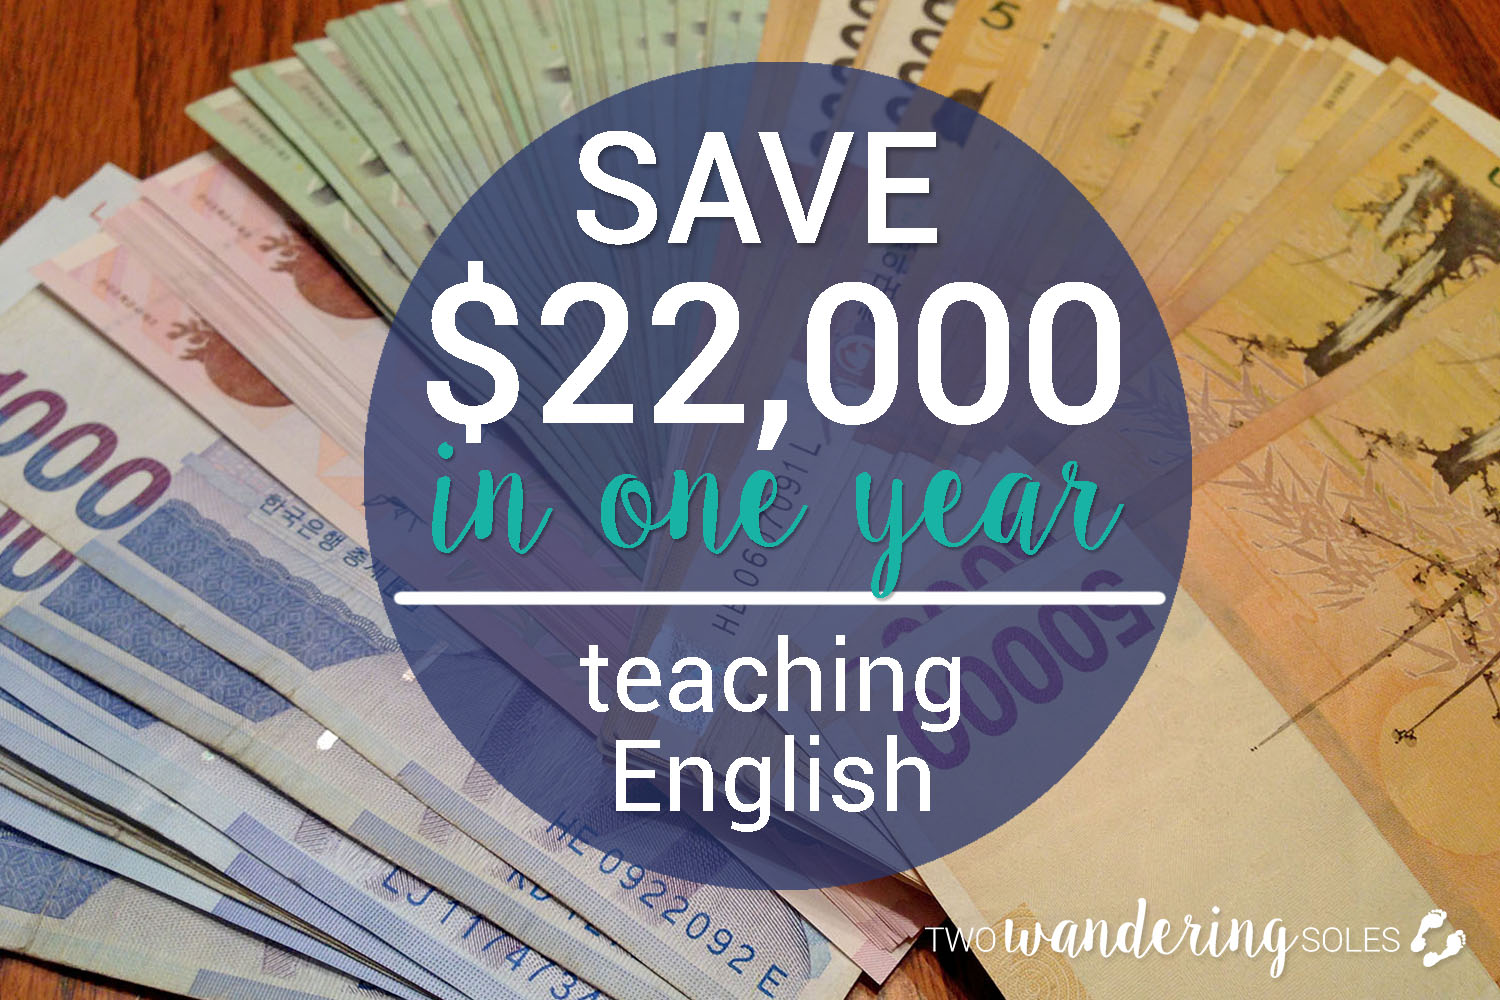 How to Save $22,000 in one year teaching English in South Korea